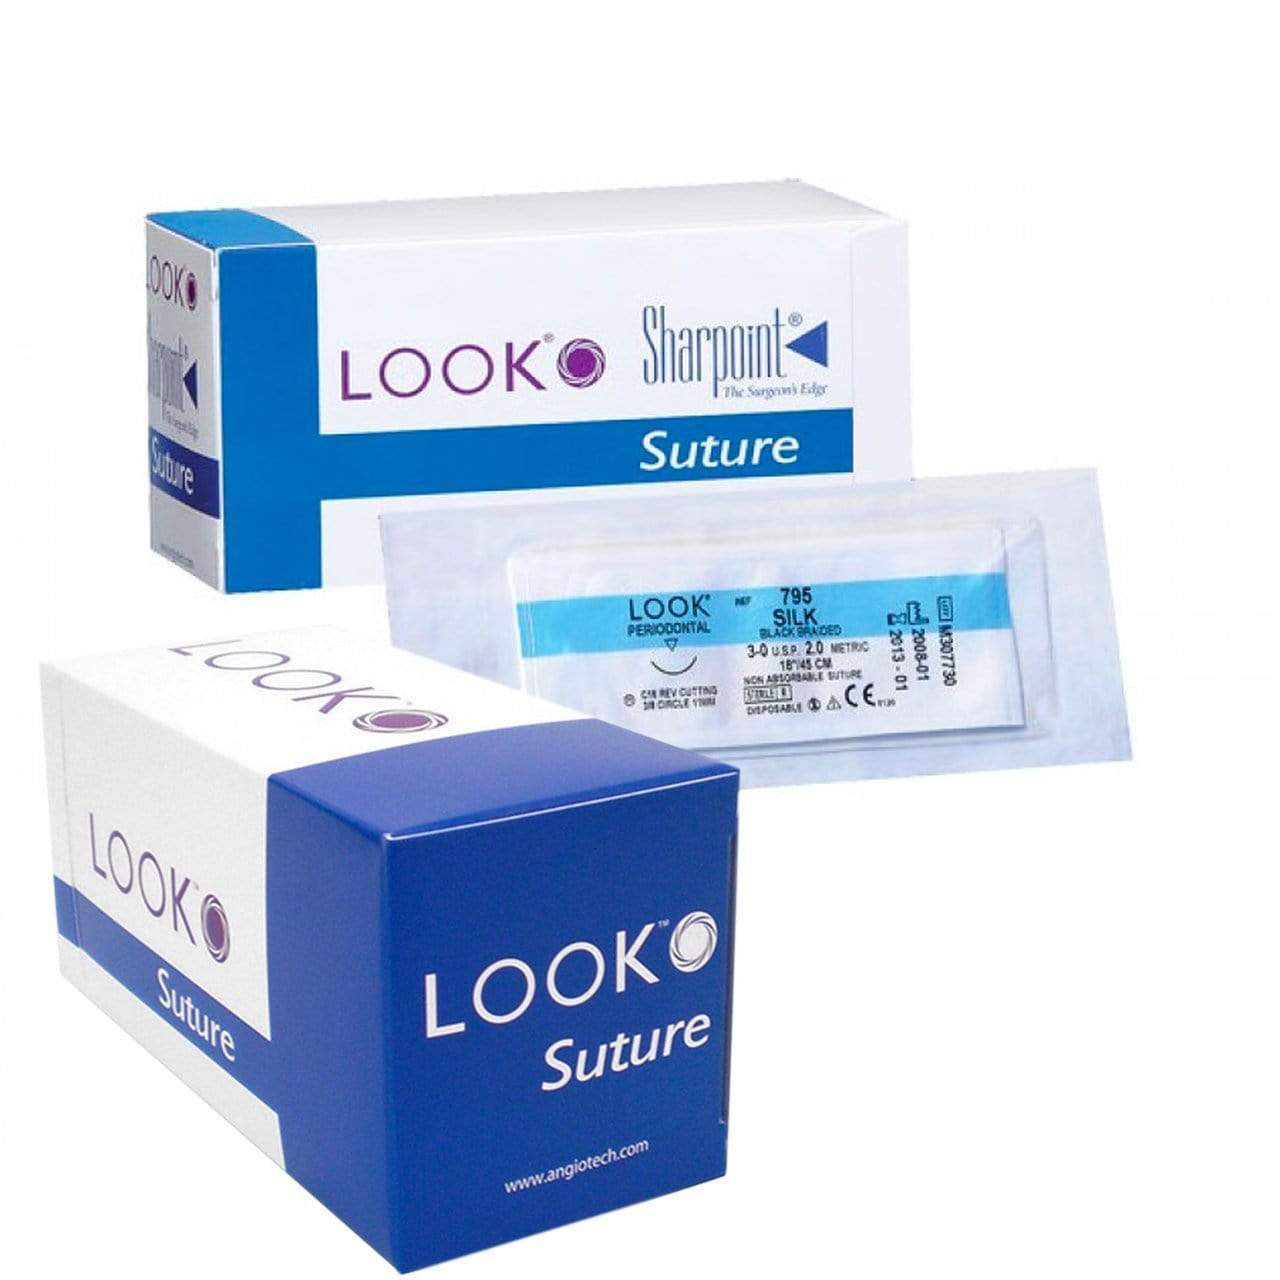 Sharpoint and LOOK Sutures